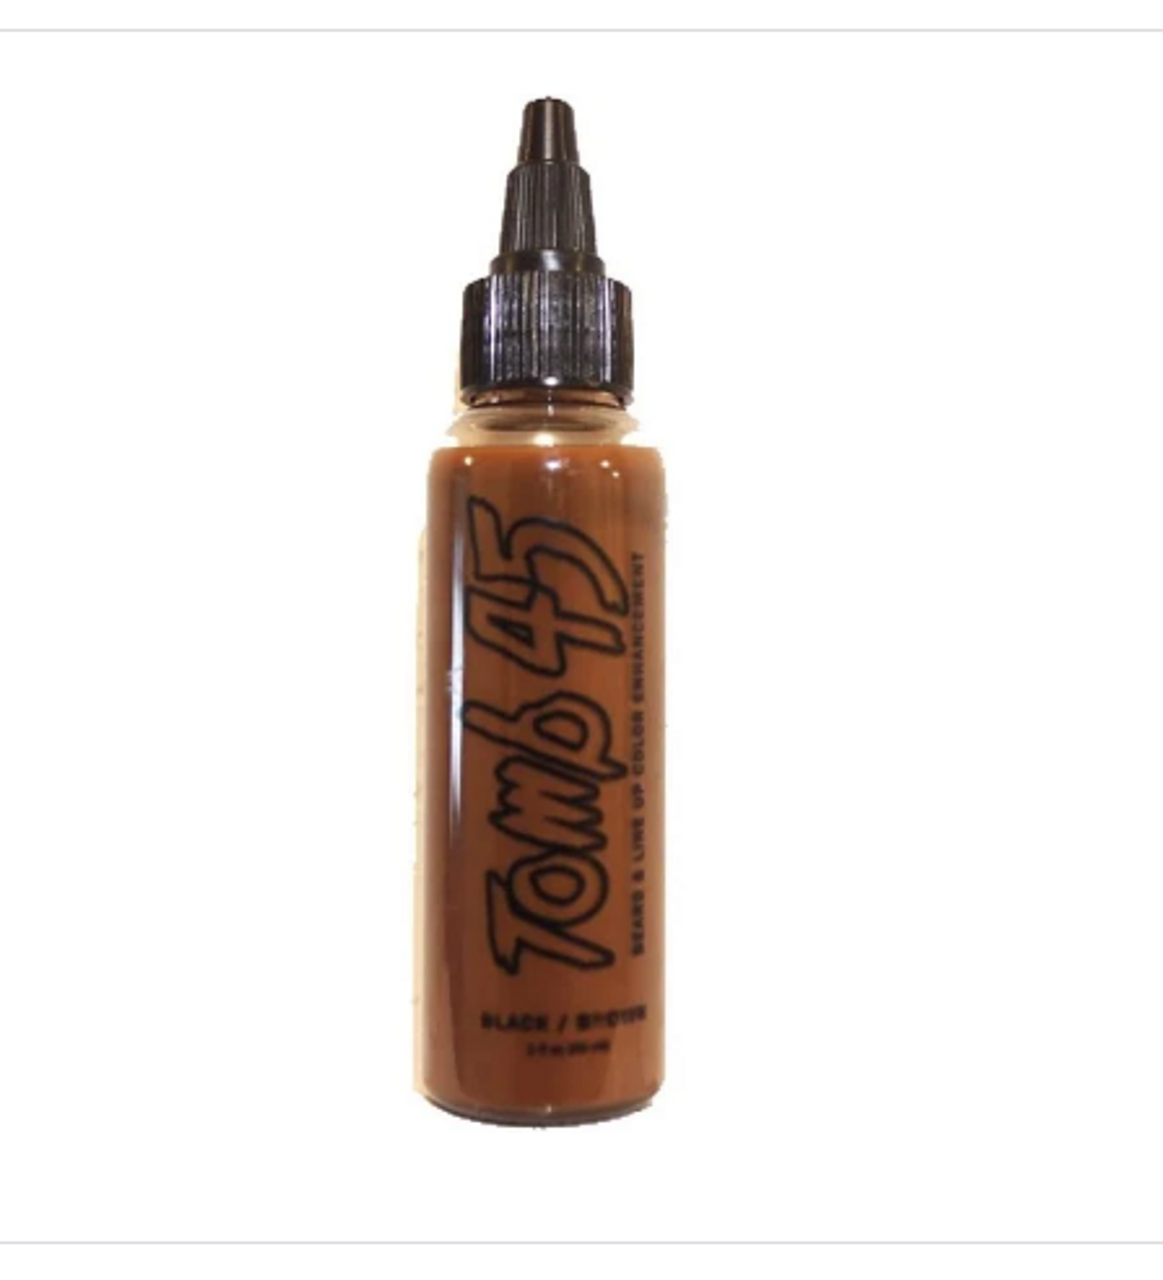 Tomb 45 Beard and Line Up Color Enhancement - Black/Brown - 2oz.